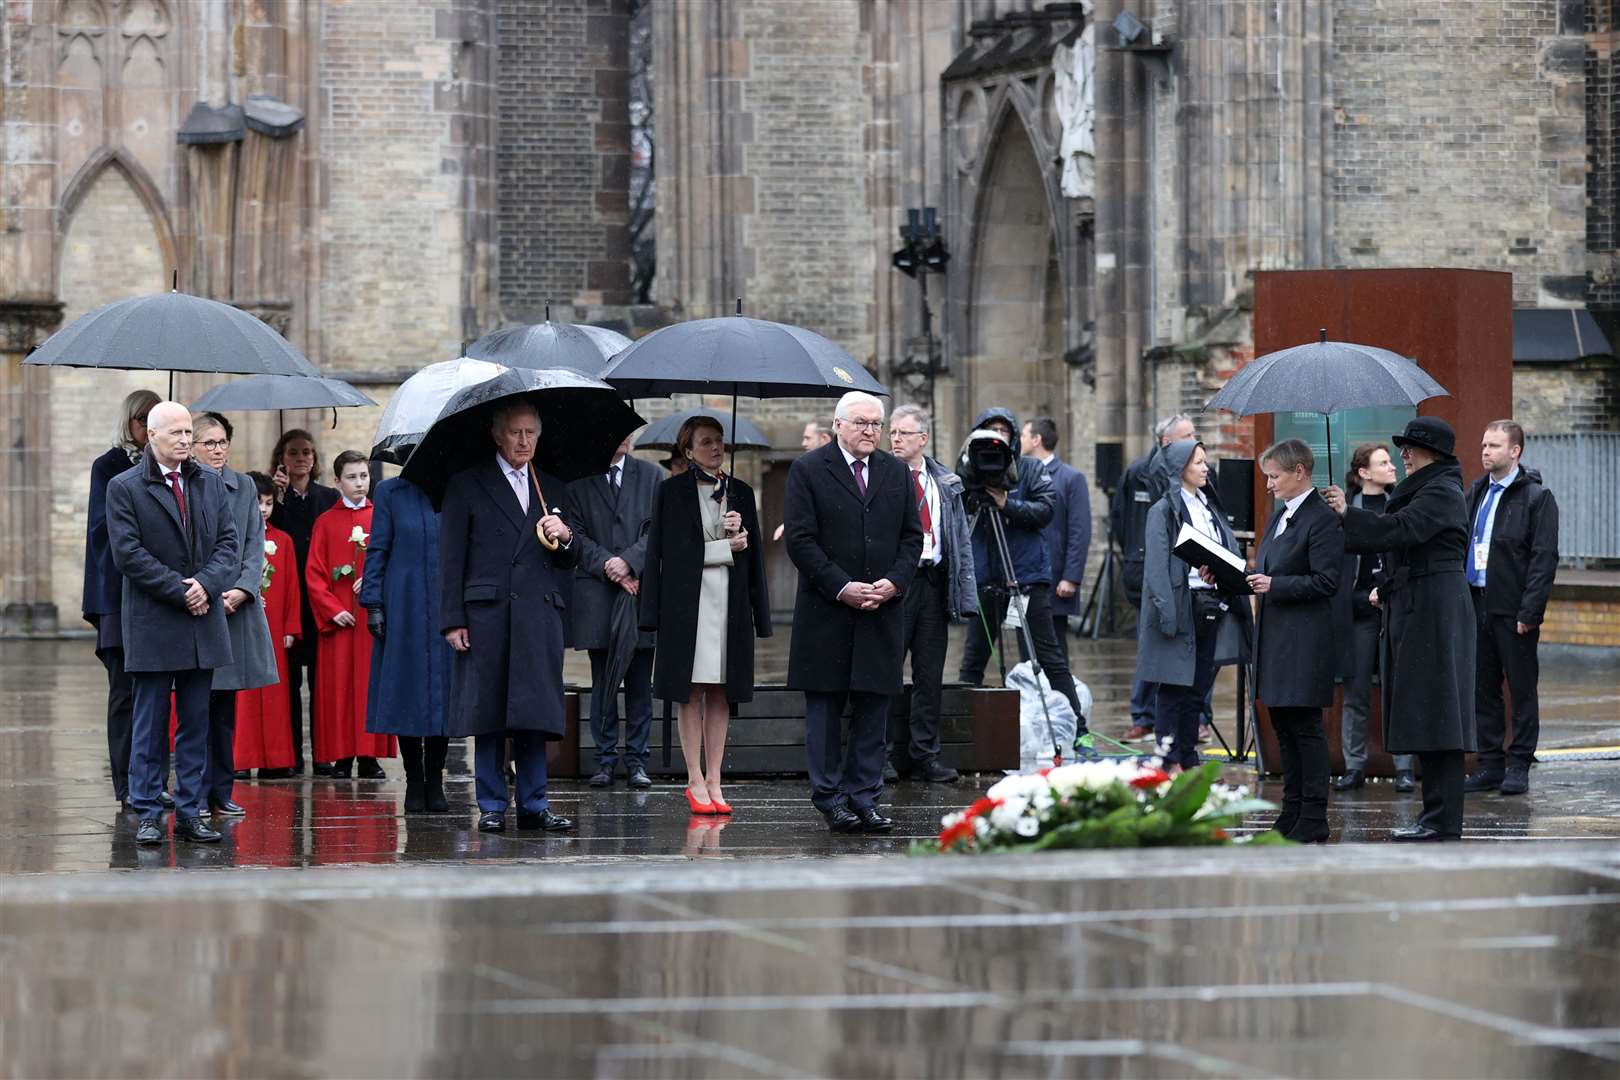 Left to right, Hamburg’s mayor Peter Tschentscher, the King, Elke Buedenbender, and German President Frank-Walter Steinmeier during a wreath-laying ceremony, symbolising reconciliation and the German-British friendship, at St Nikolai Memorial Church, Hamburg (Adrian Dennis/PA)